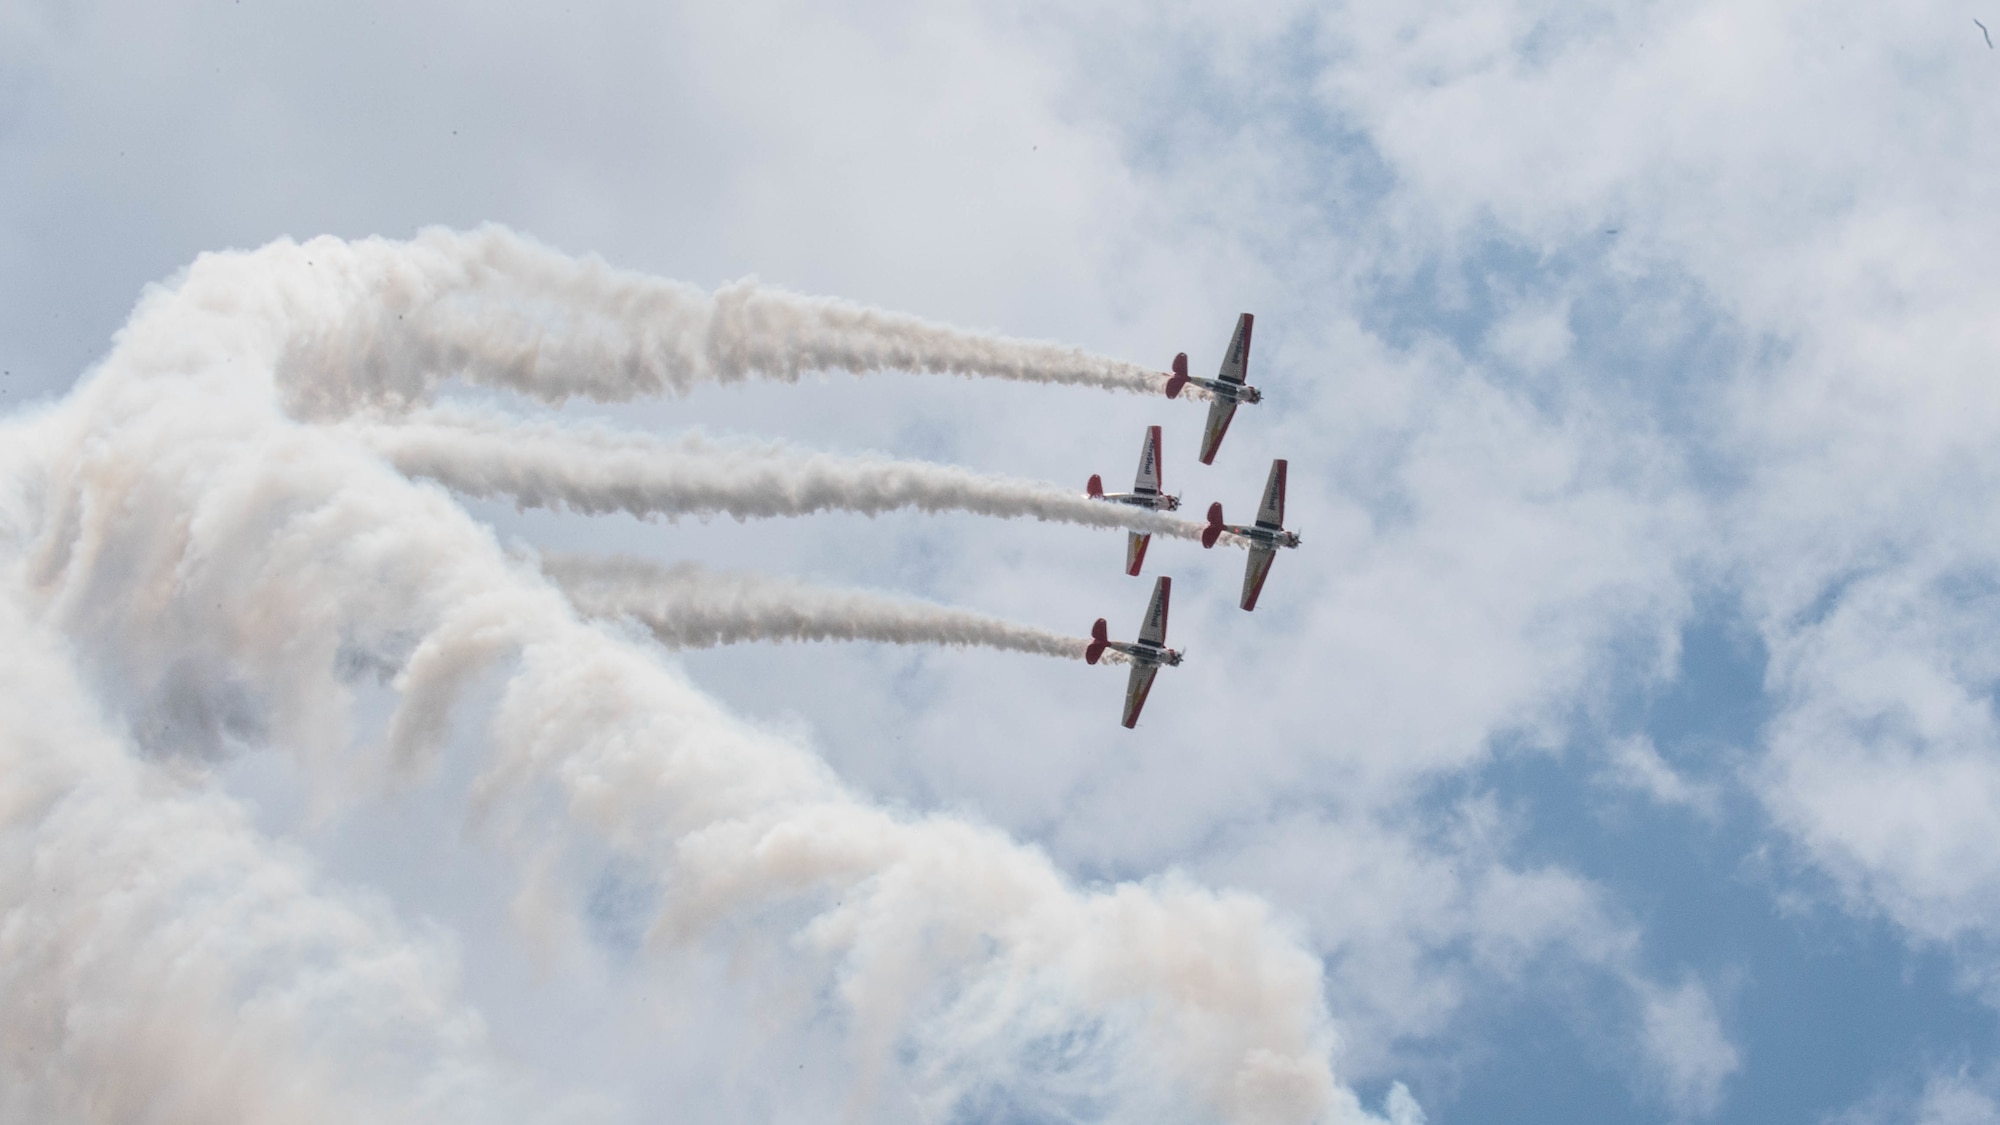 Barksdale hosts highly anticipated 2019 air show > Barksdale Air Force